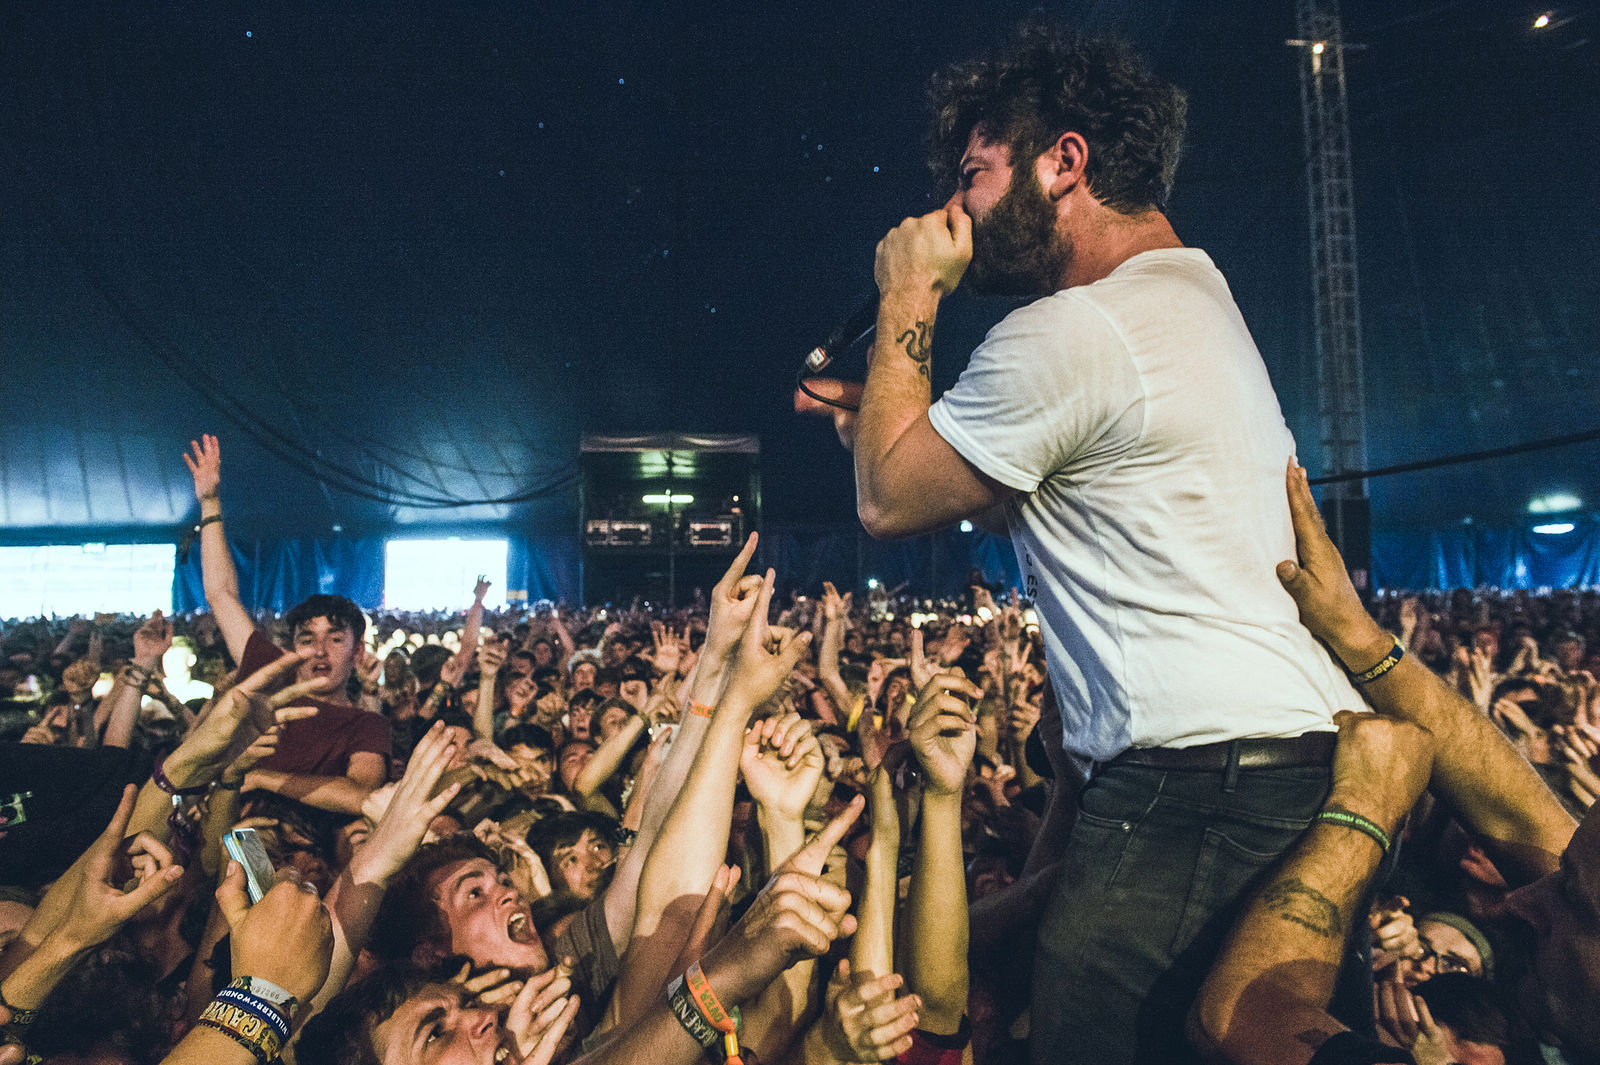 The Foals